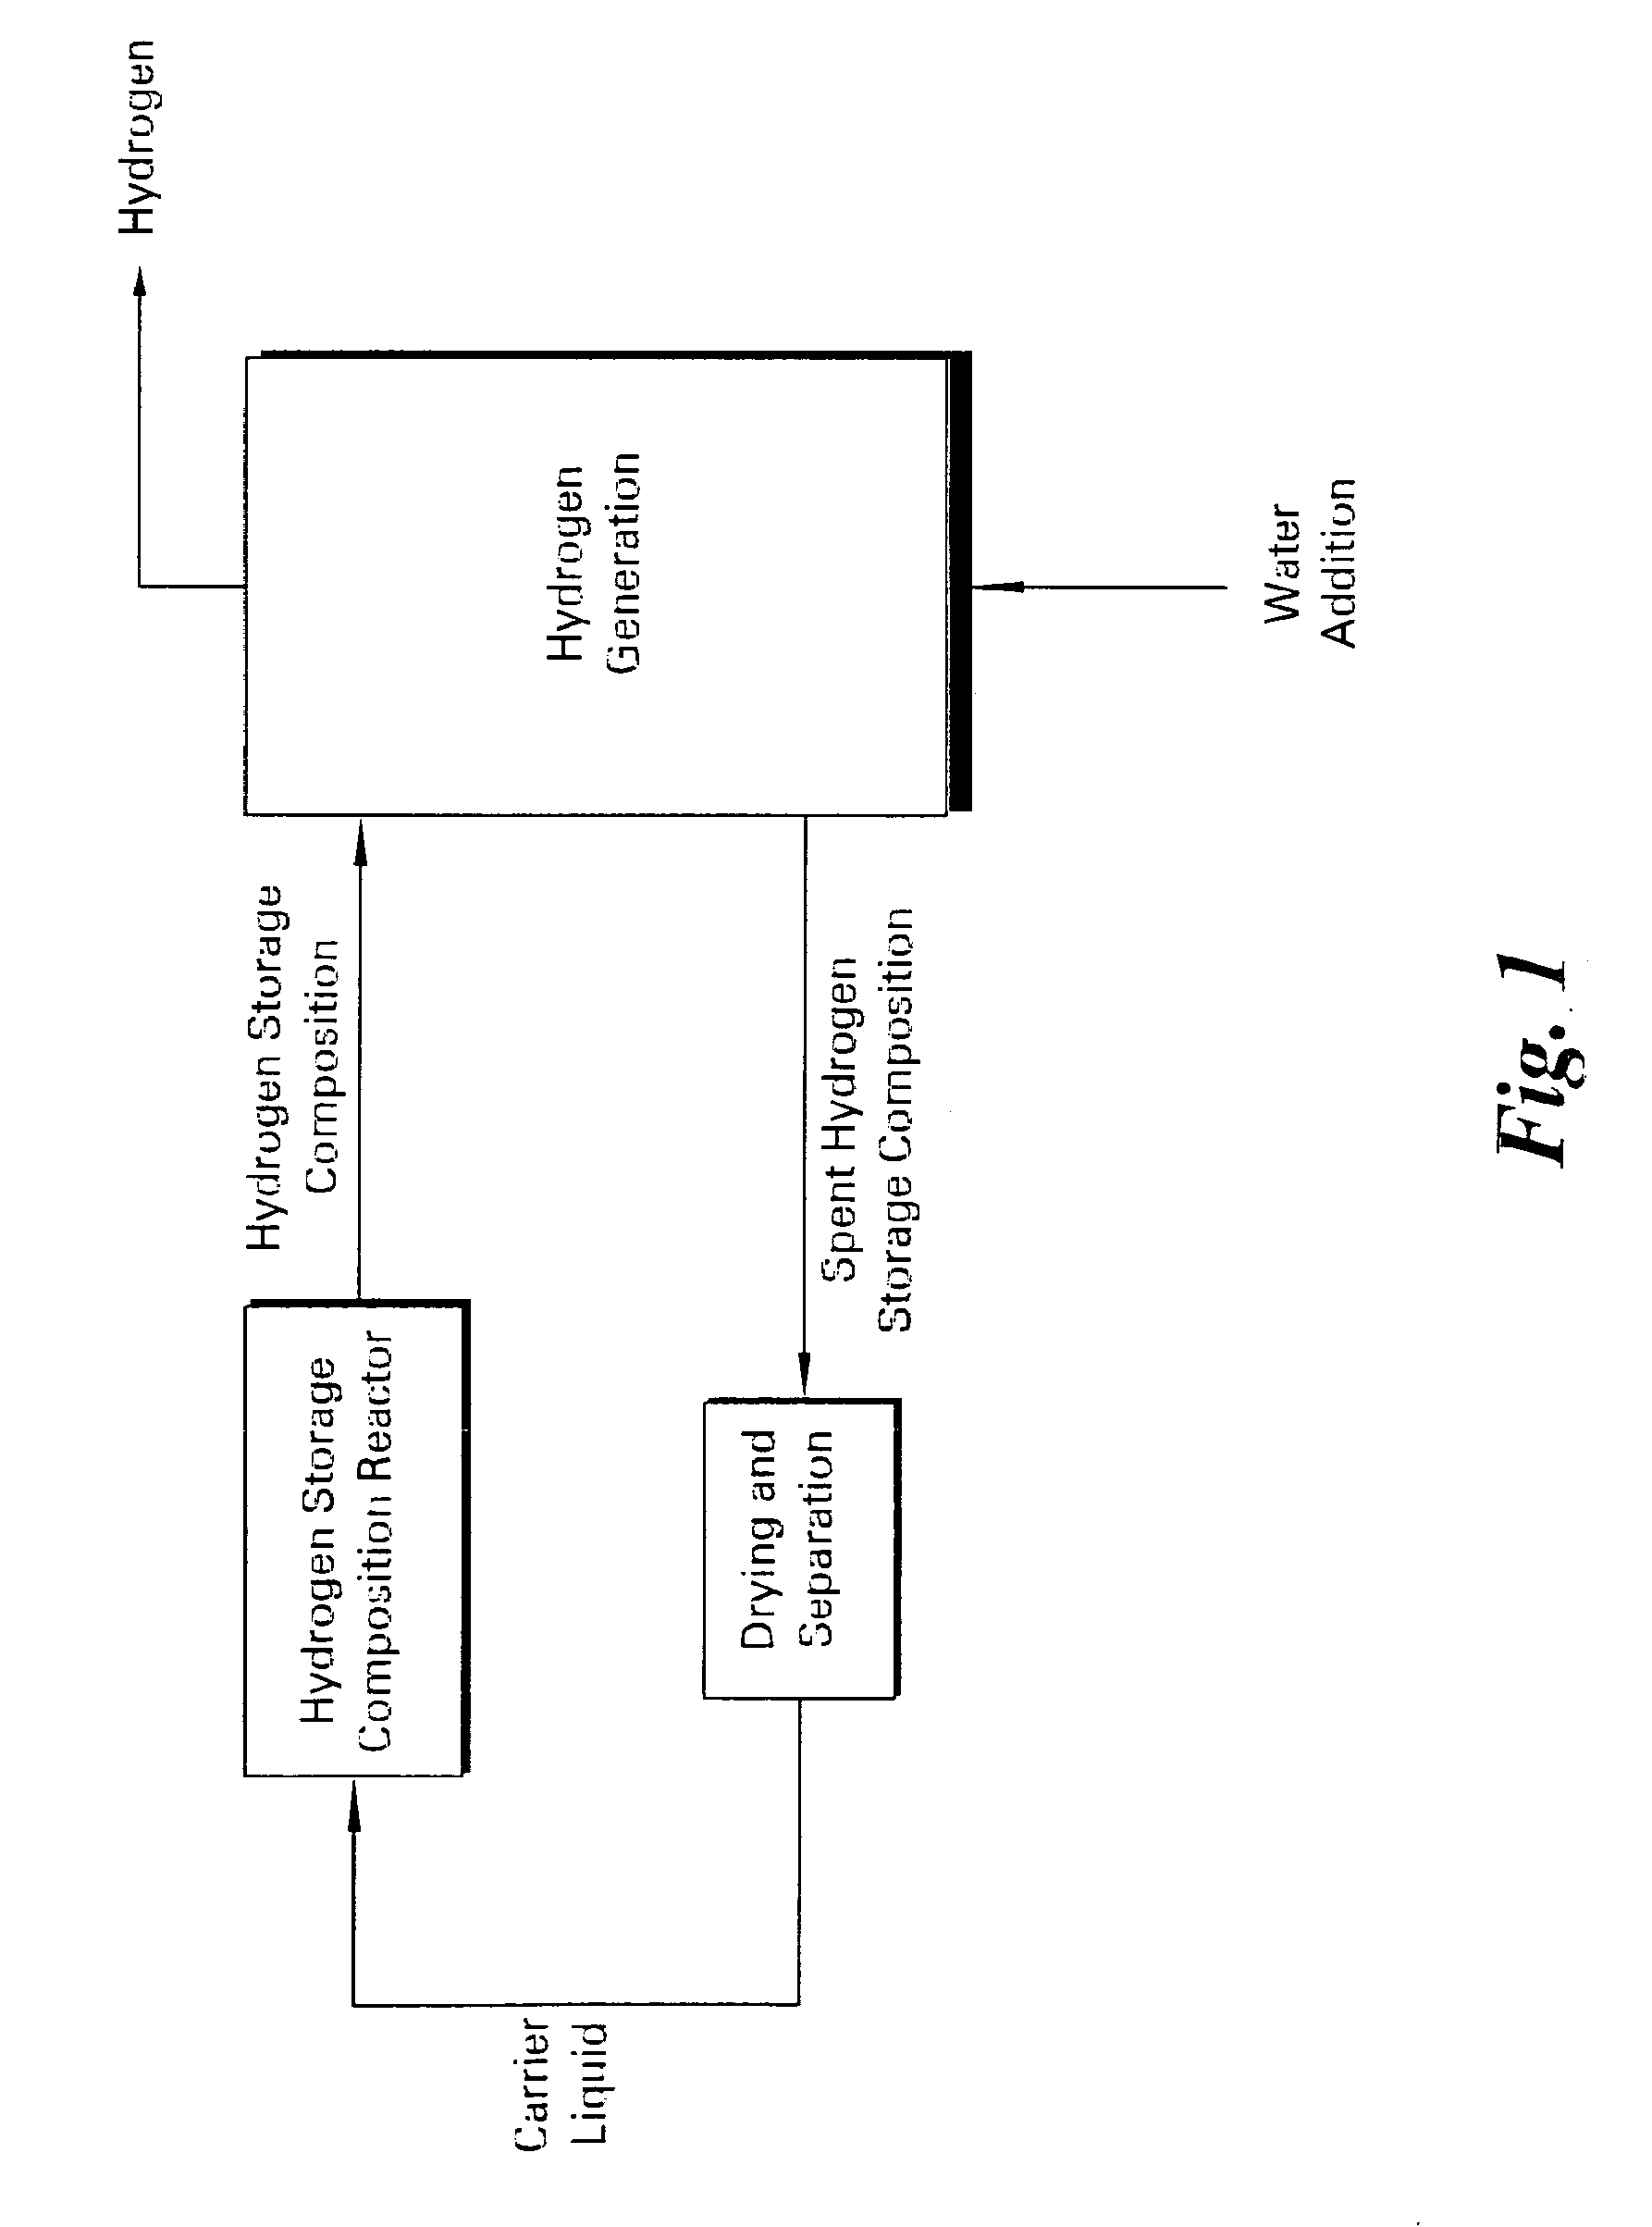 Devices and methods for hydrogen storage and generation